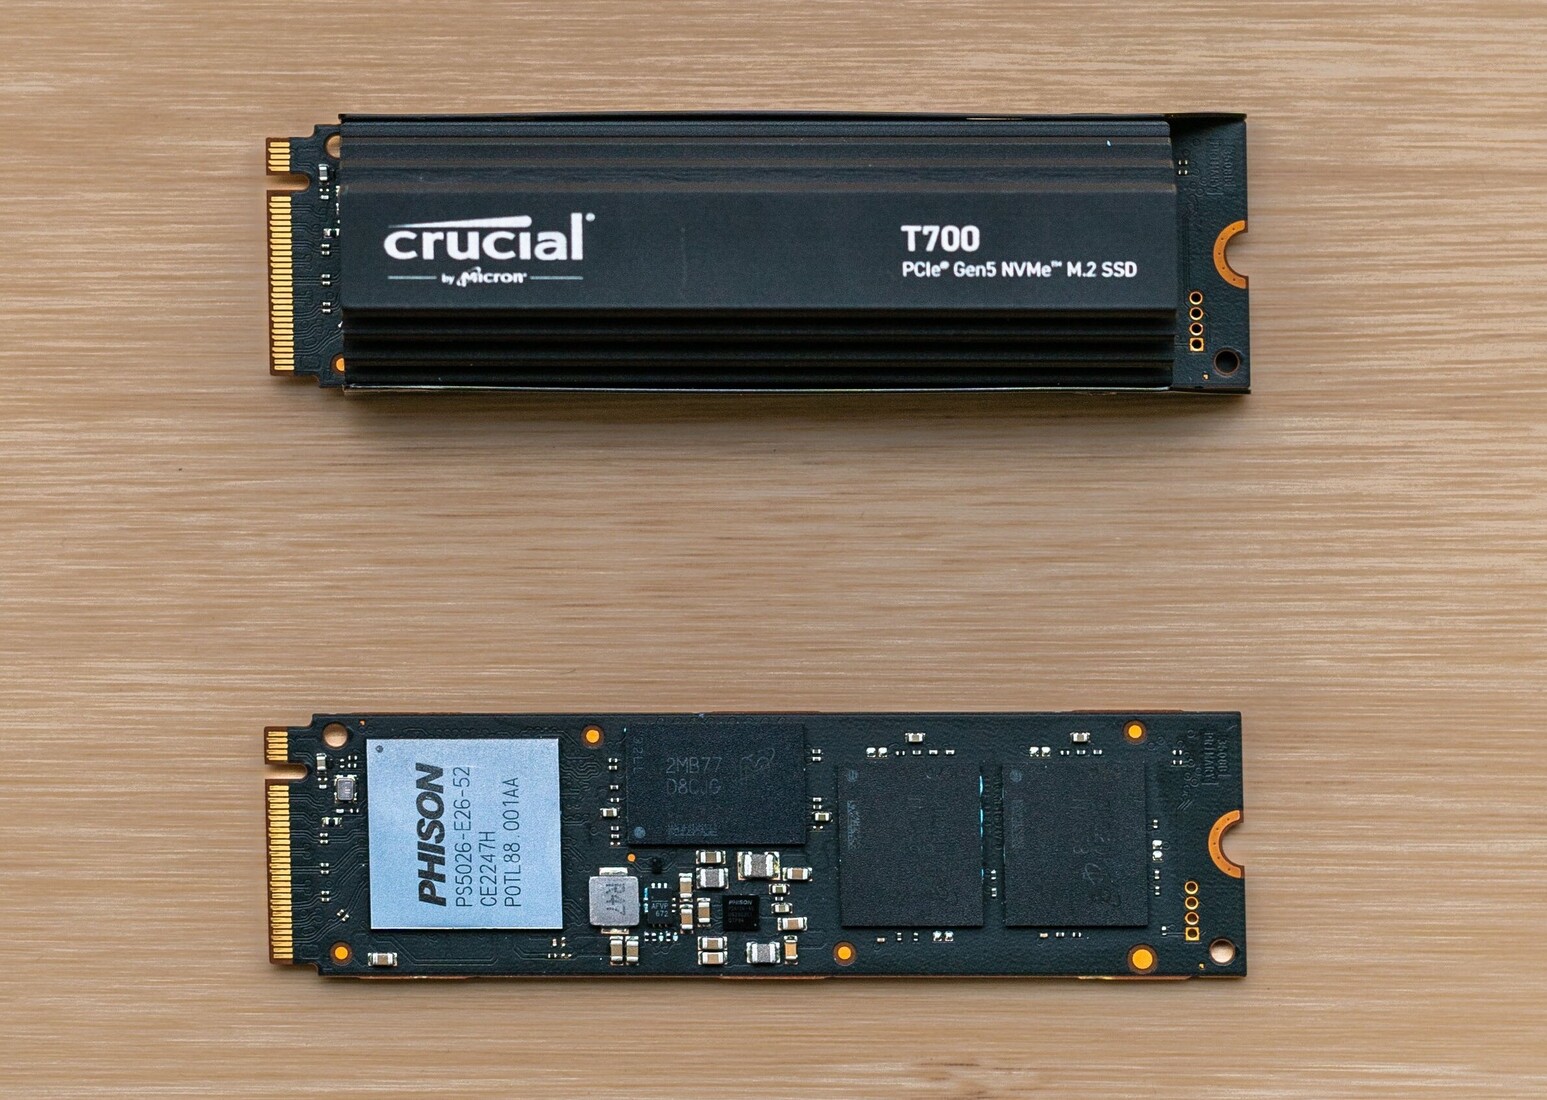 Crucial T700 Clocks 12.4 GB/s Sequential Reads in Previews